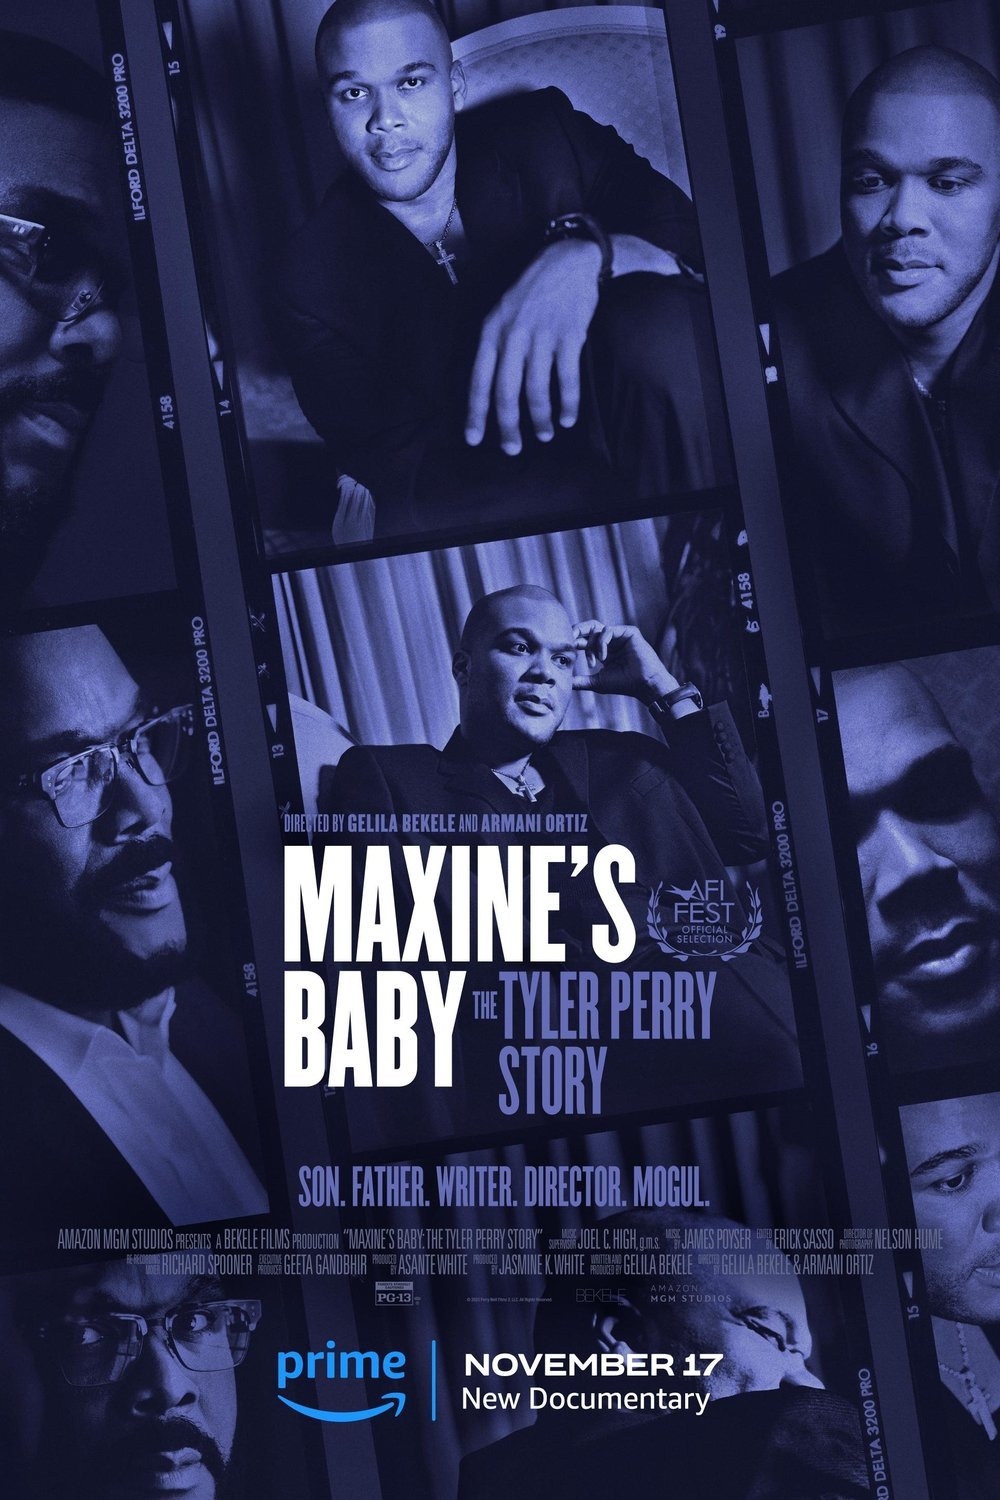 L'affiche du film Maxine's Baby: The Tyler Perry Story